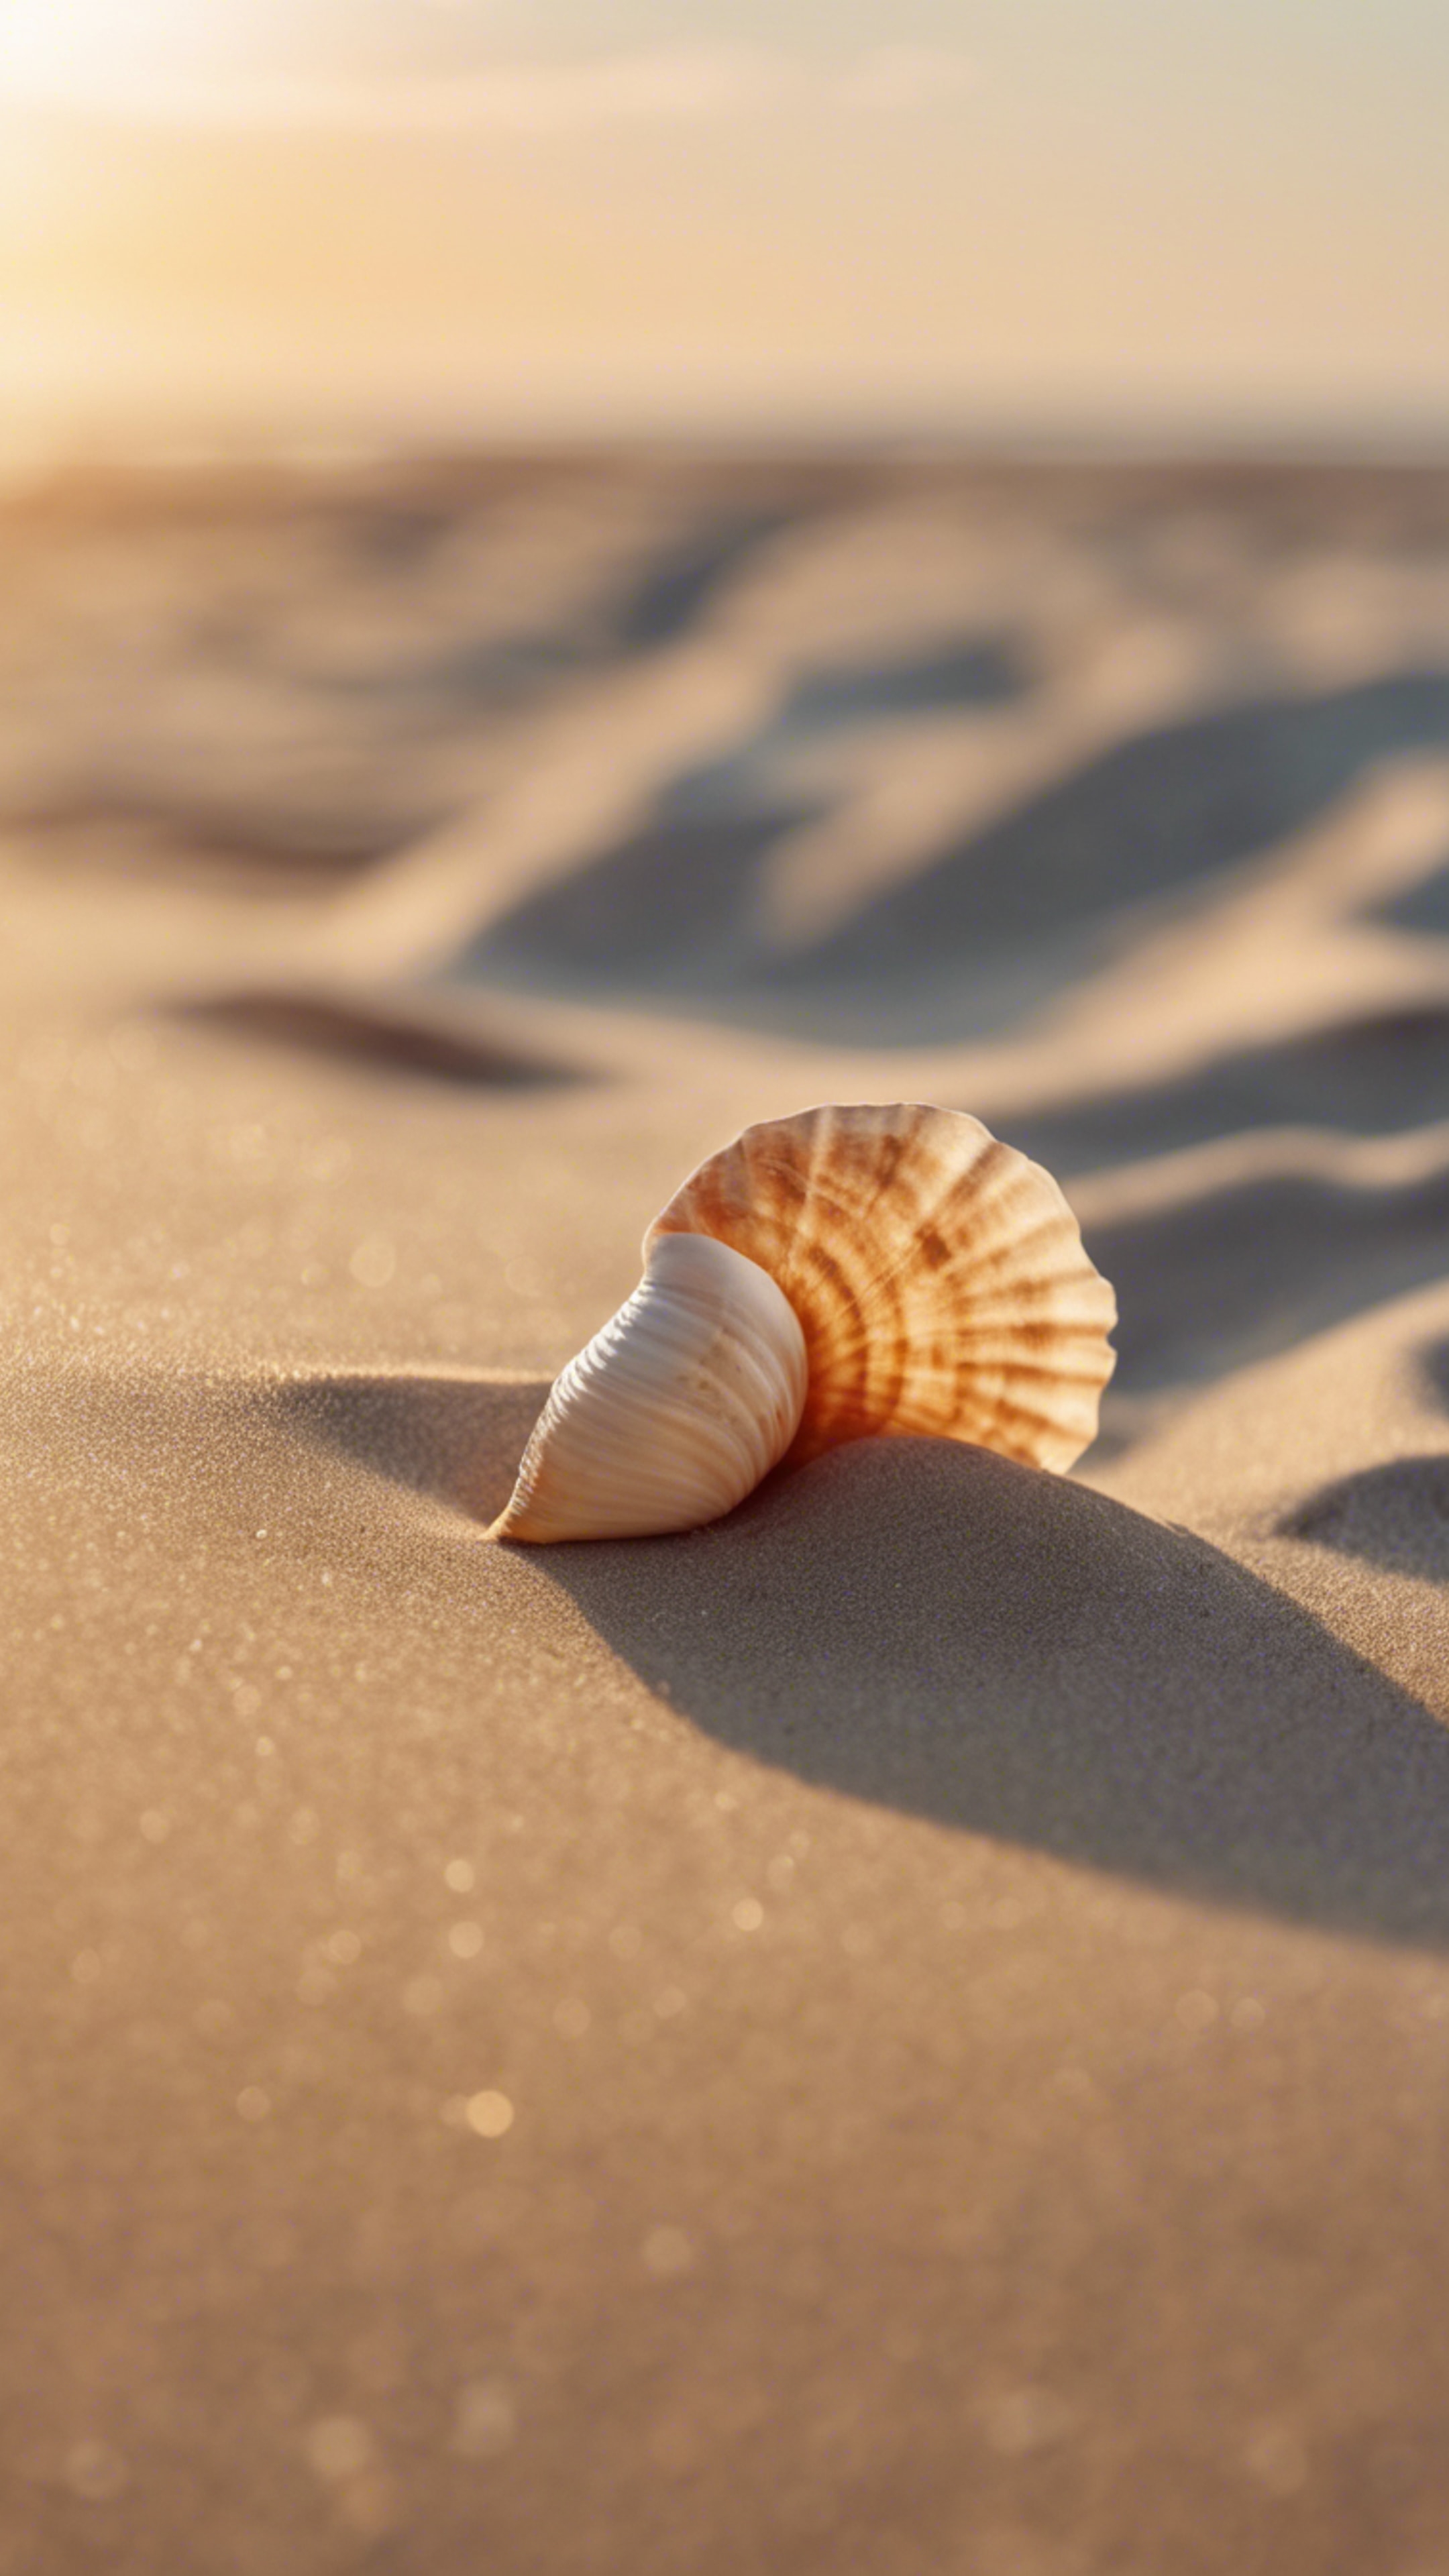 A sandy beach at sunrise, with a lonely seashell on the smooth, cool beige sand. Sfondo[f397365f3b8642f18a02]